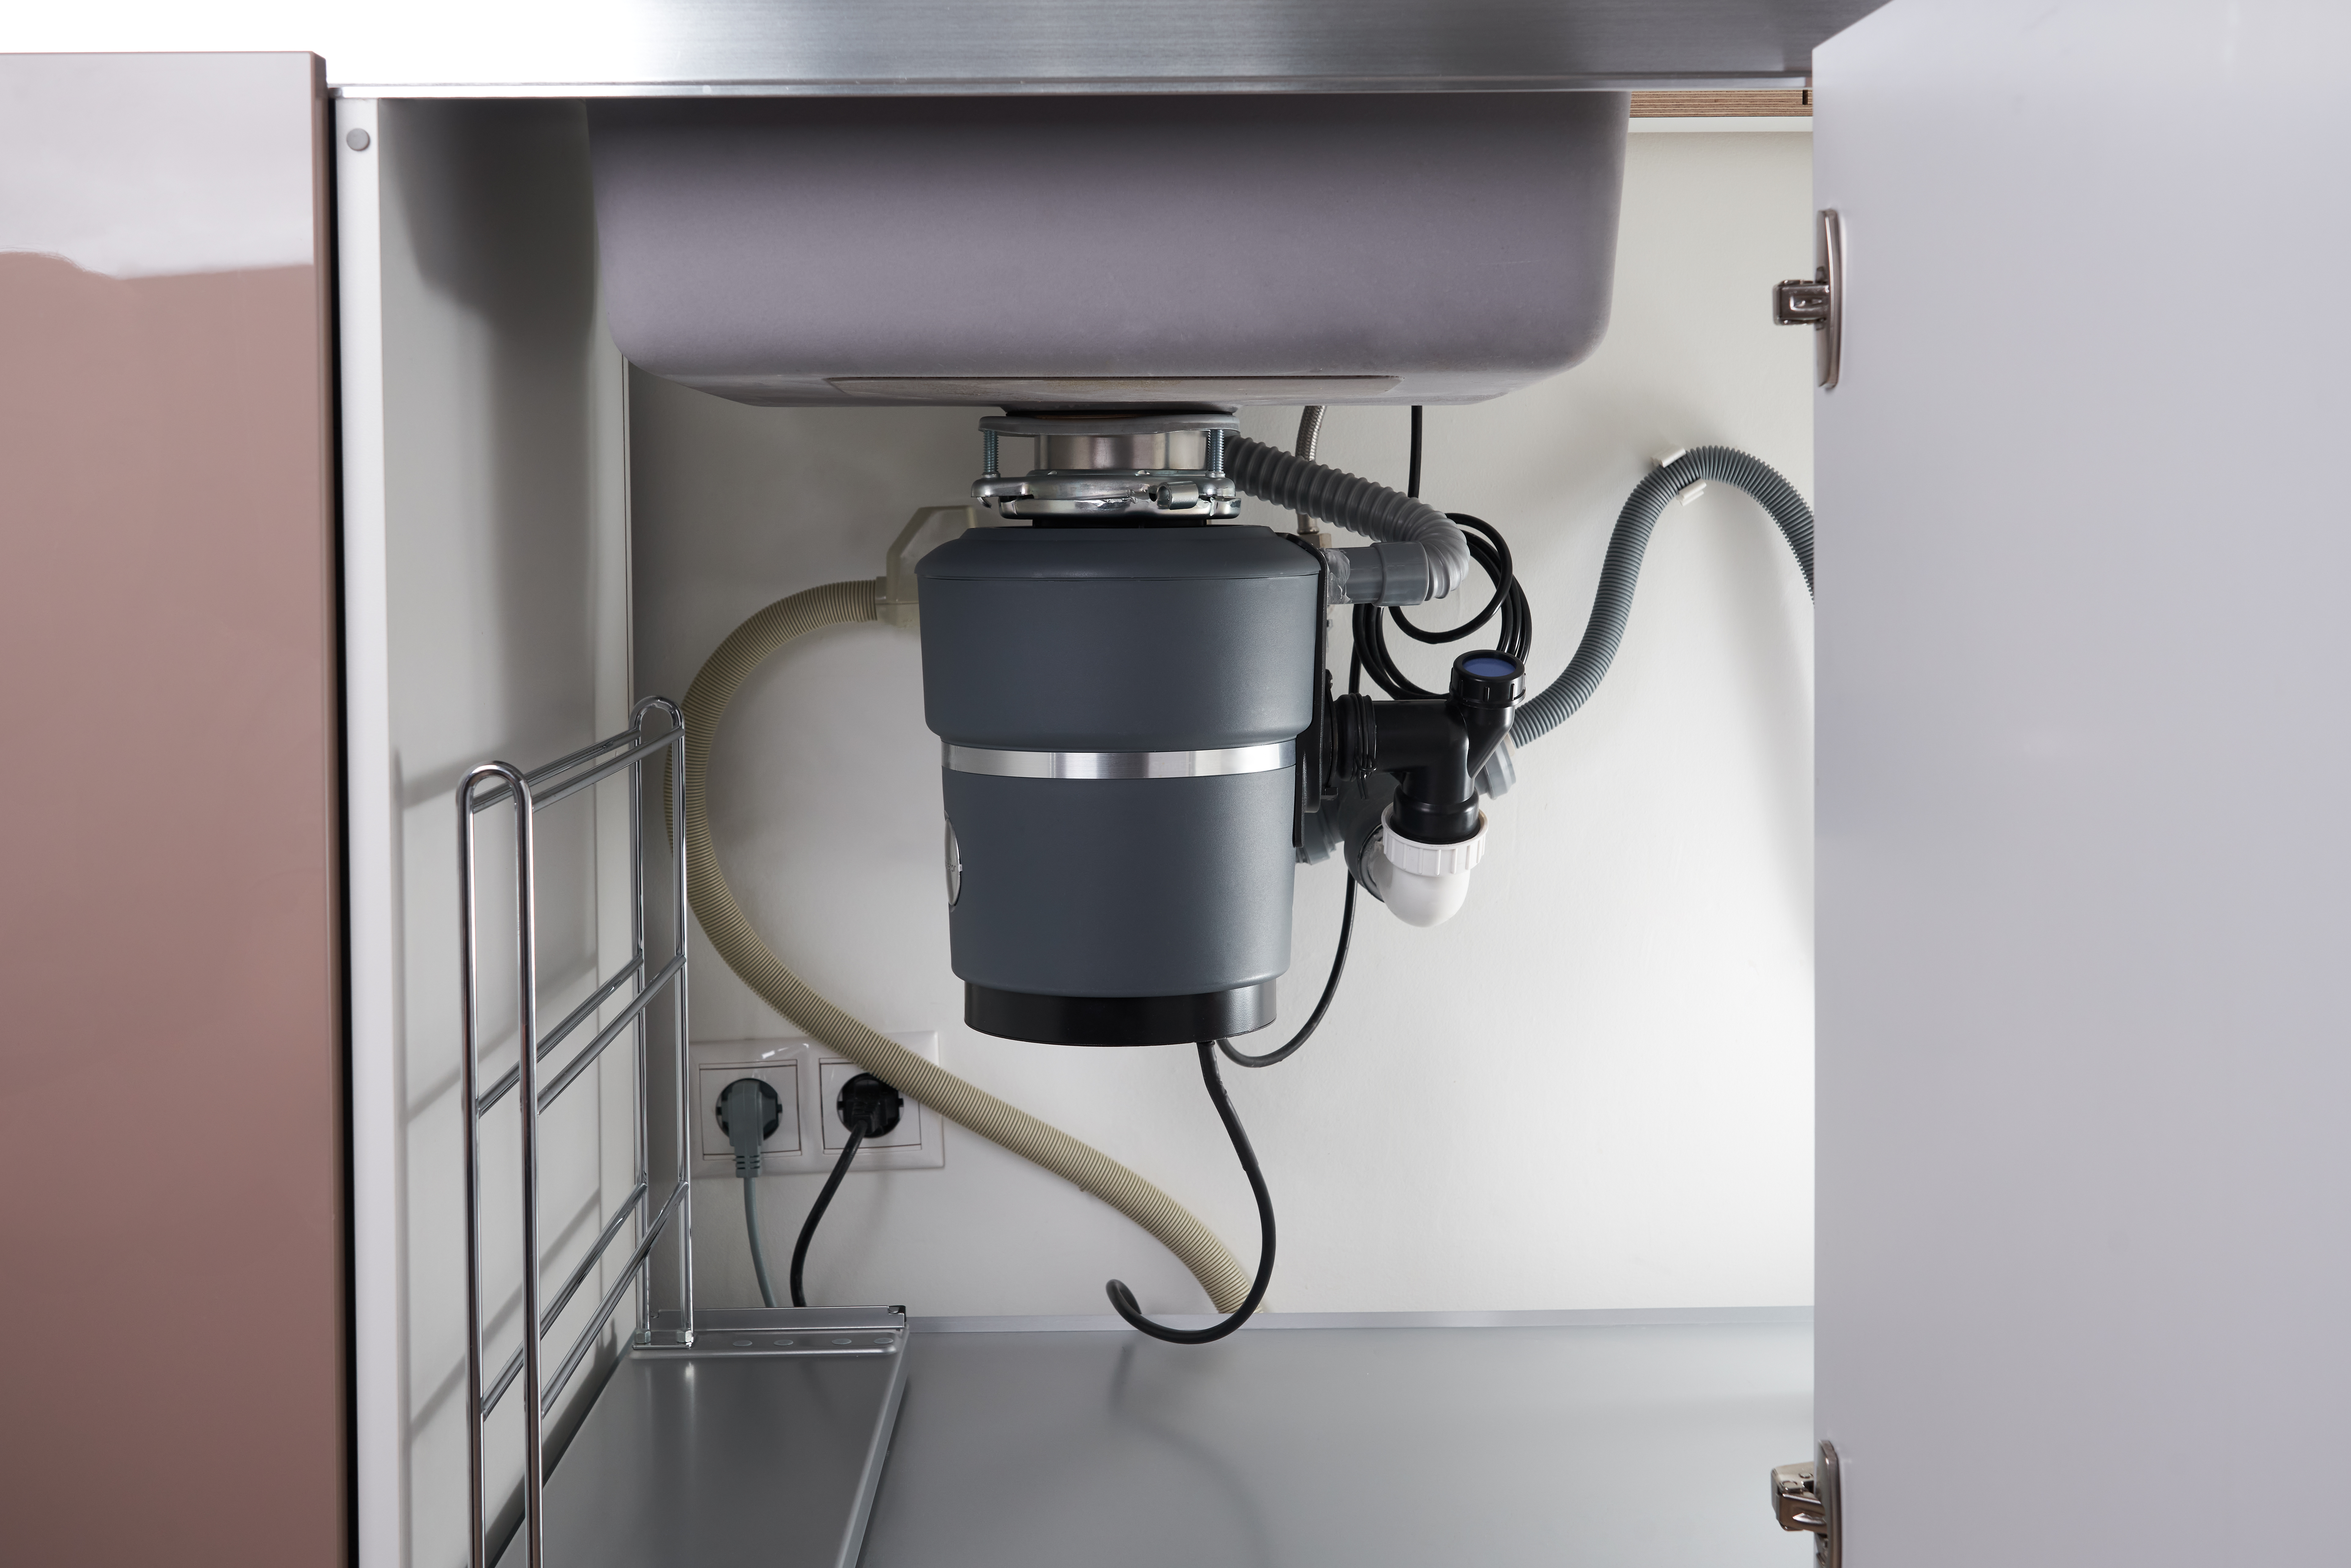 Making Garbage Disposal Connections To